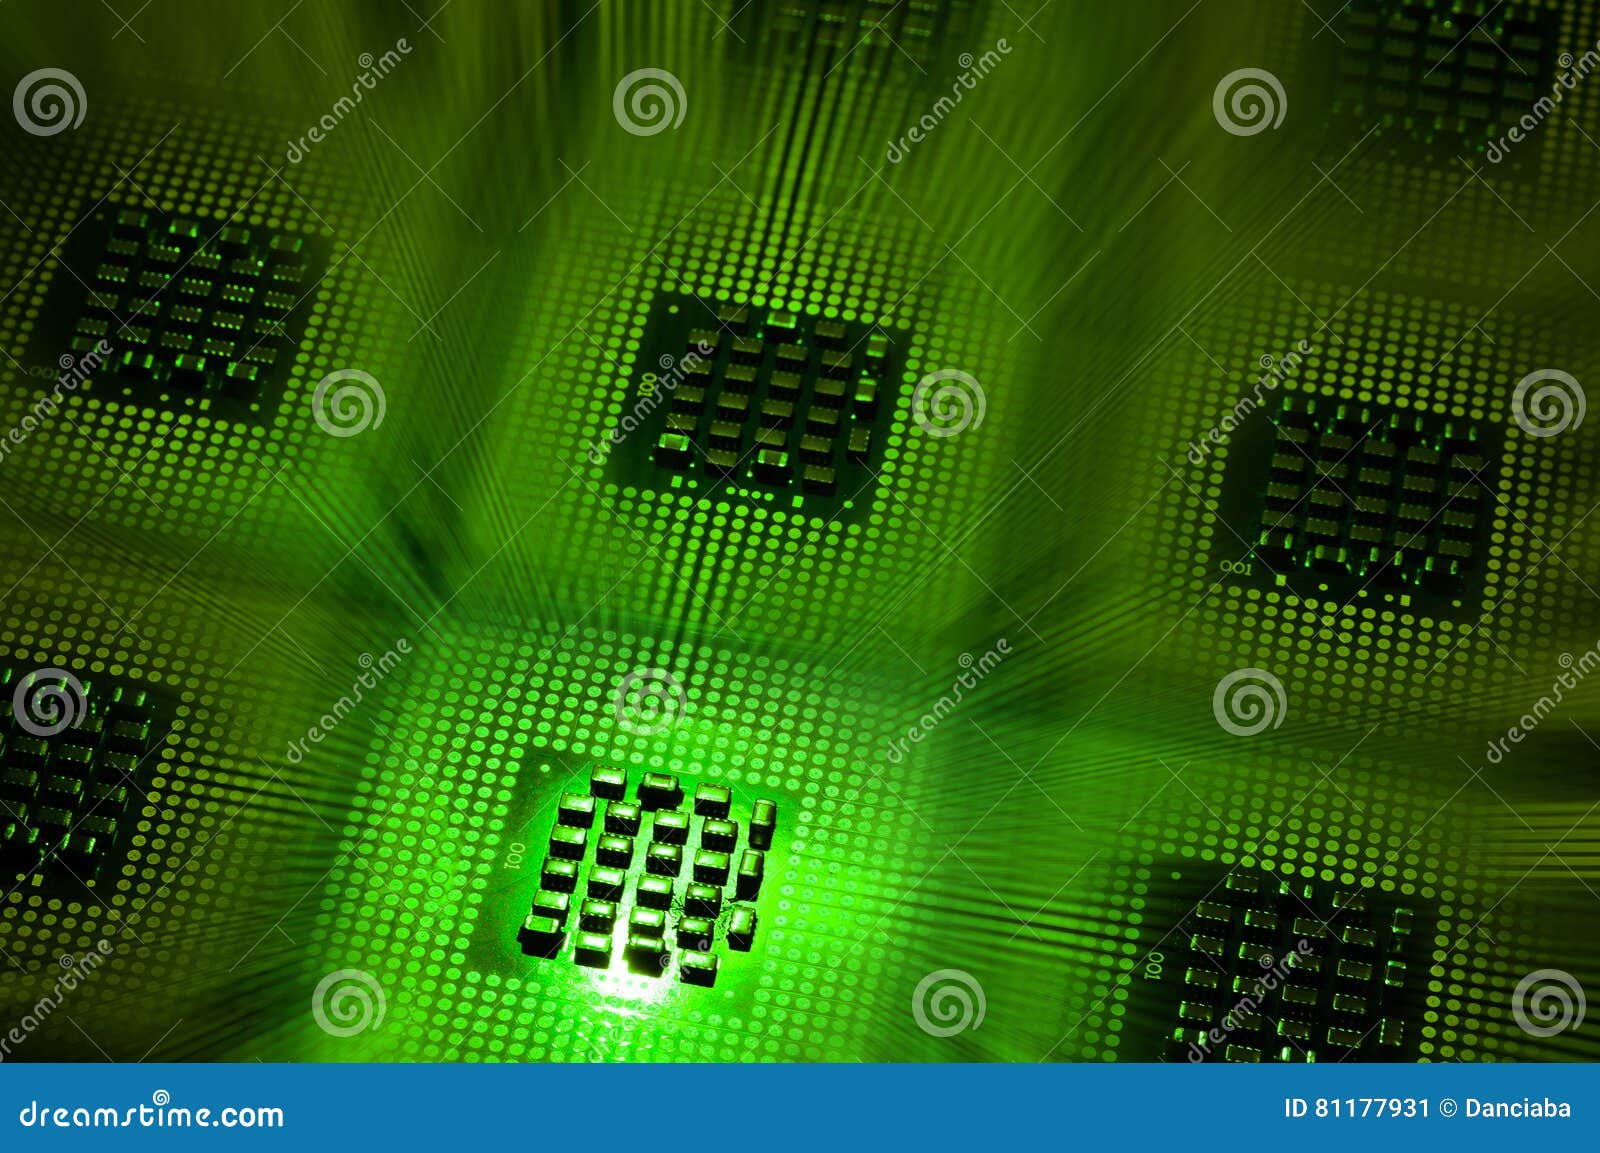 computer processors aligned with green lighting effects postproduction